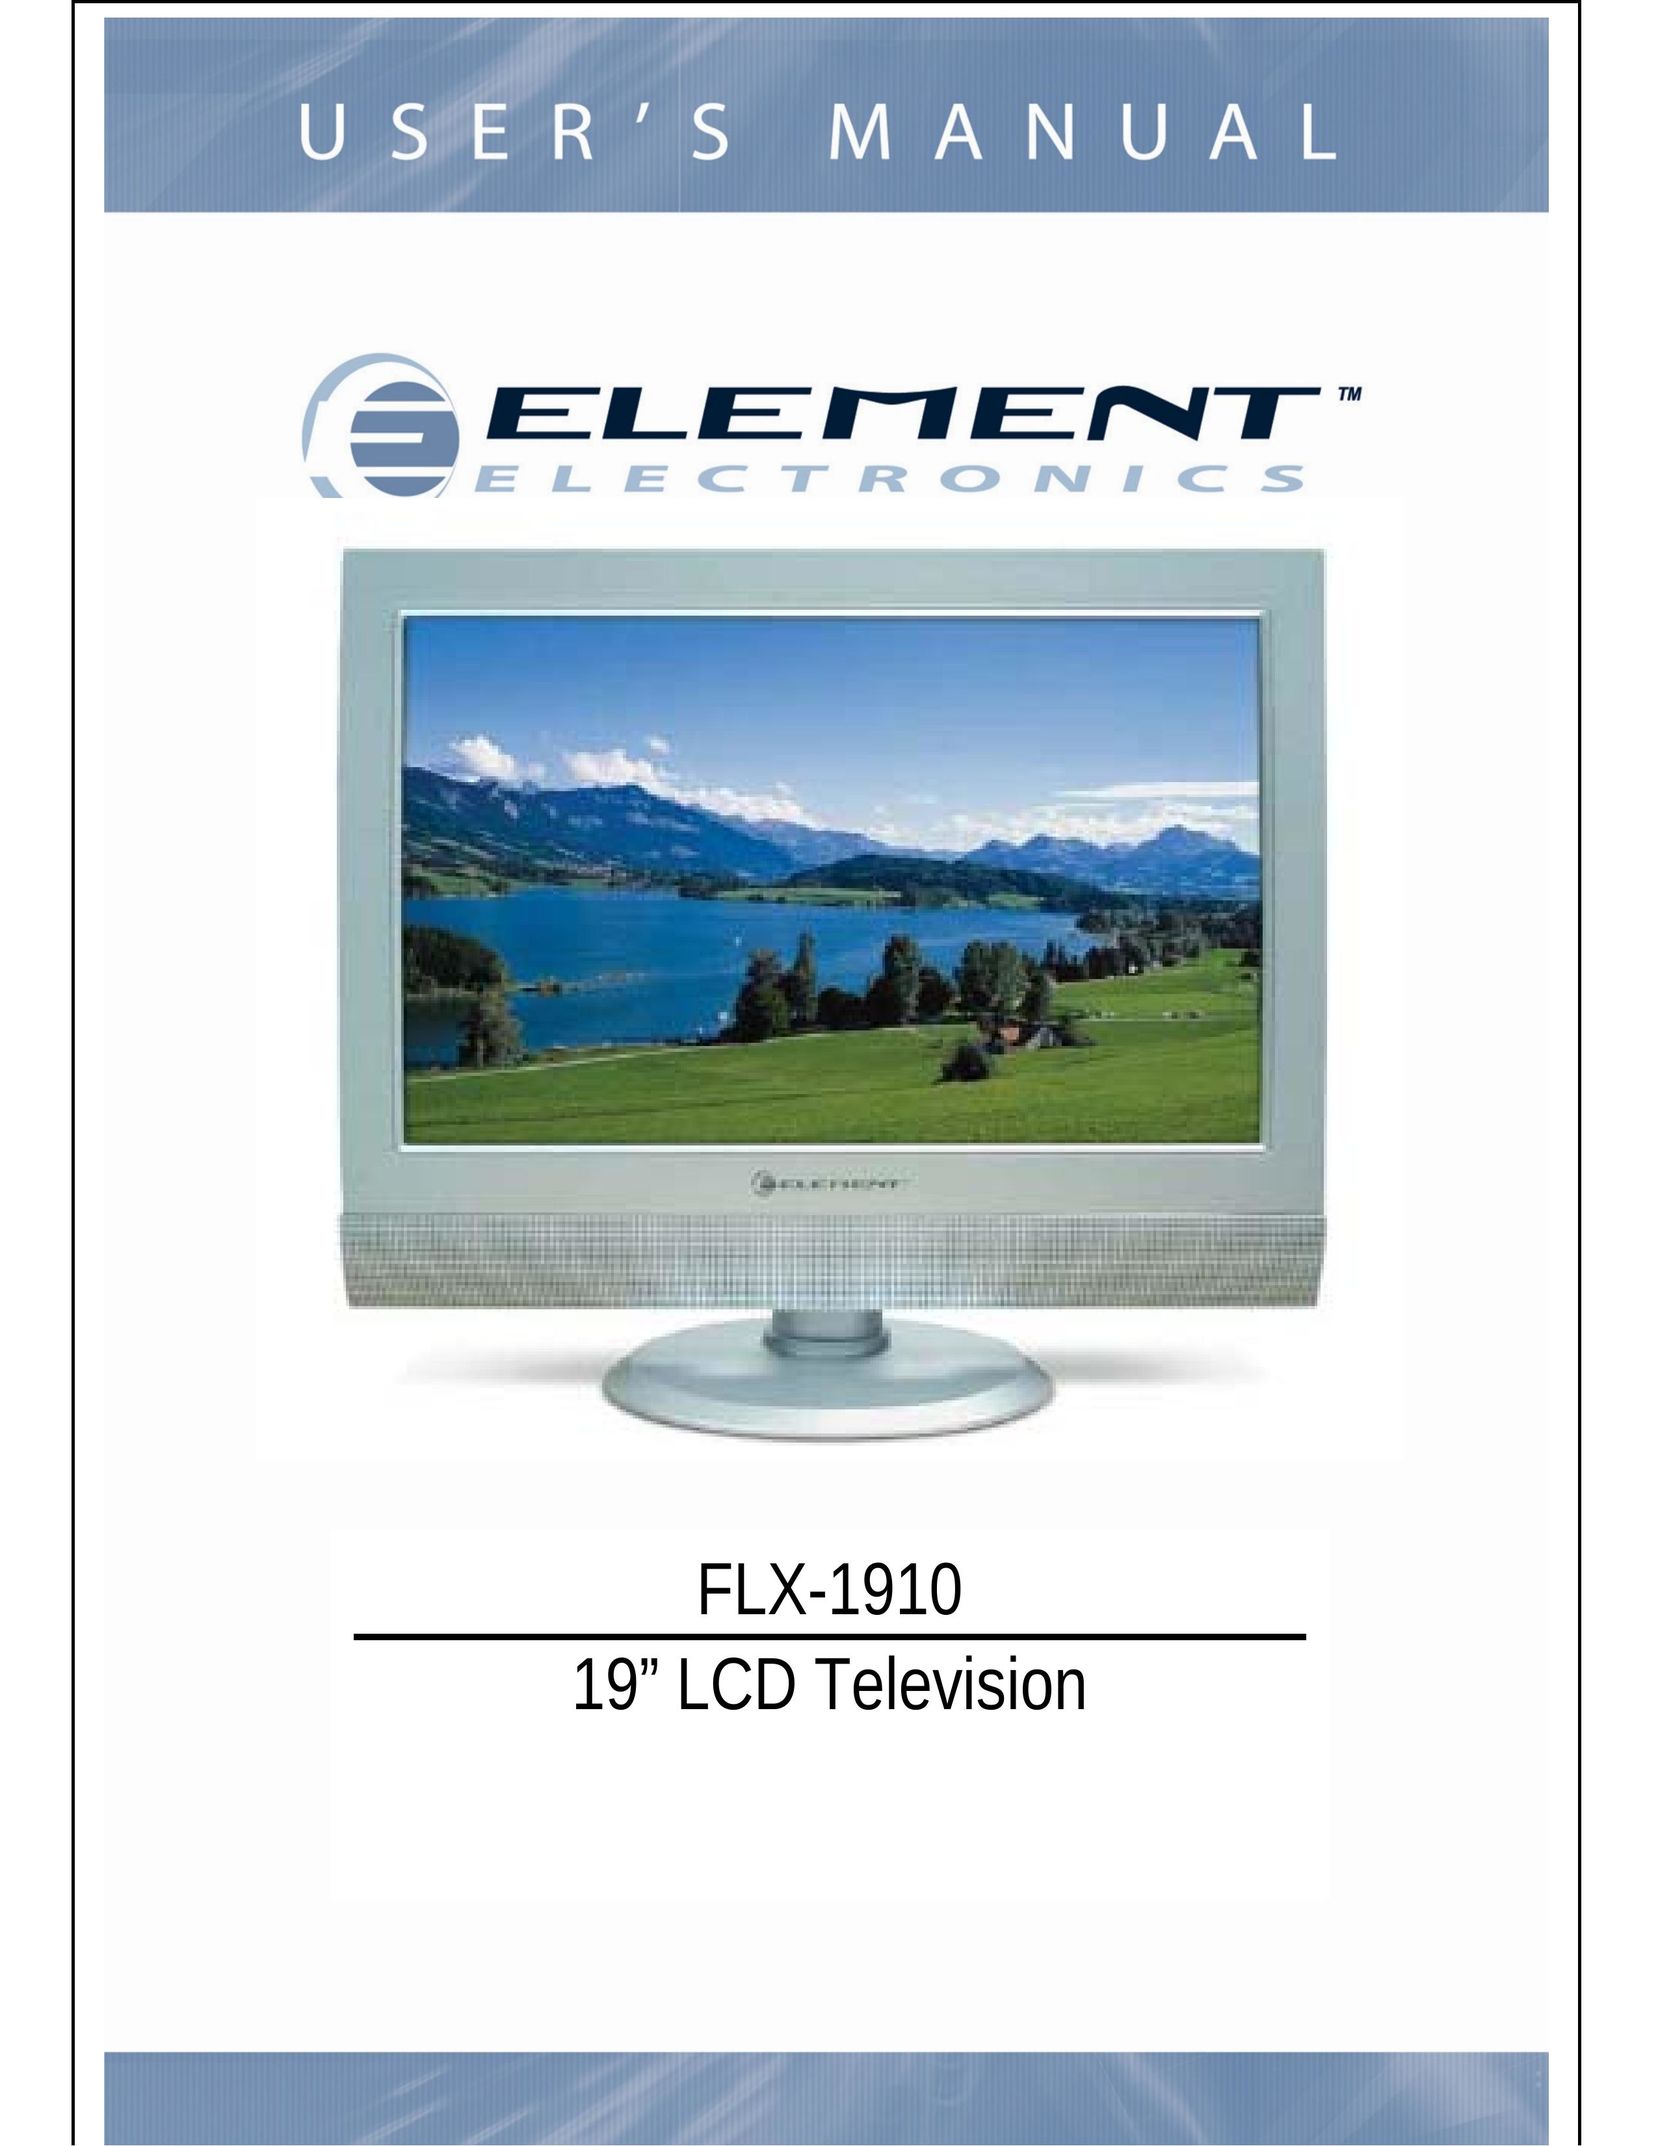 Dolby Laboratories FLX-1910 Flat Panel Television User Manual